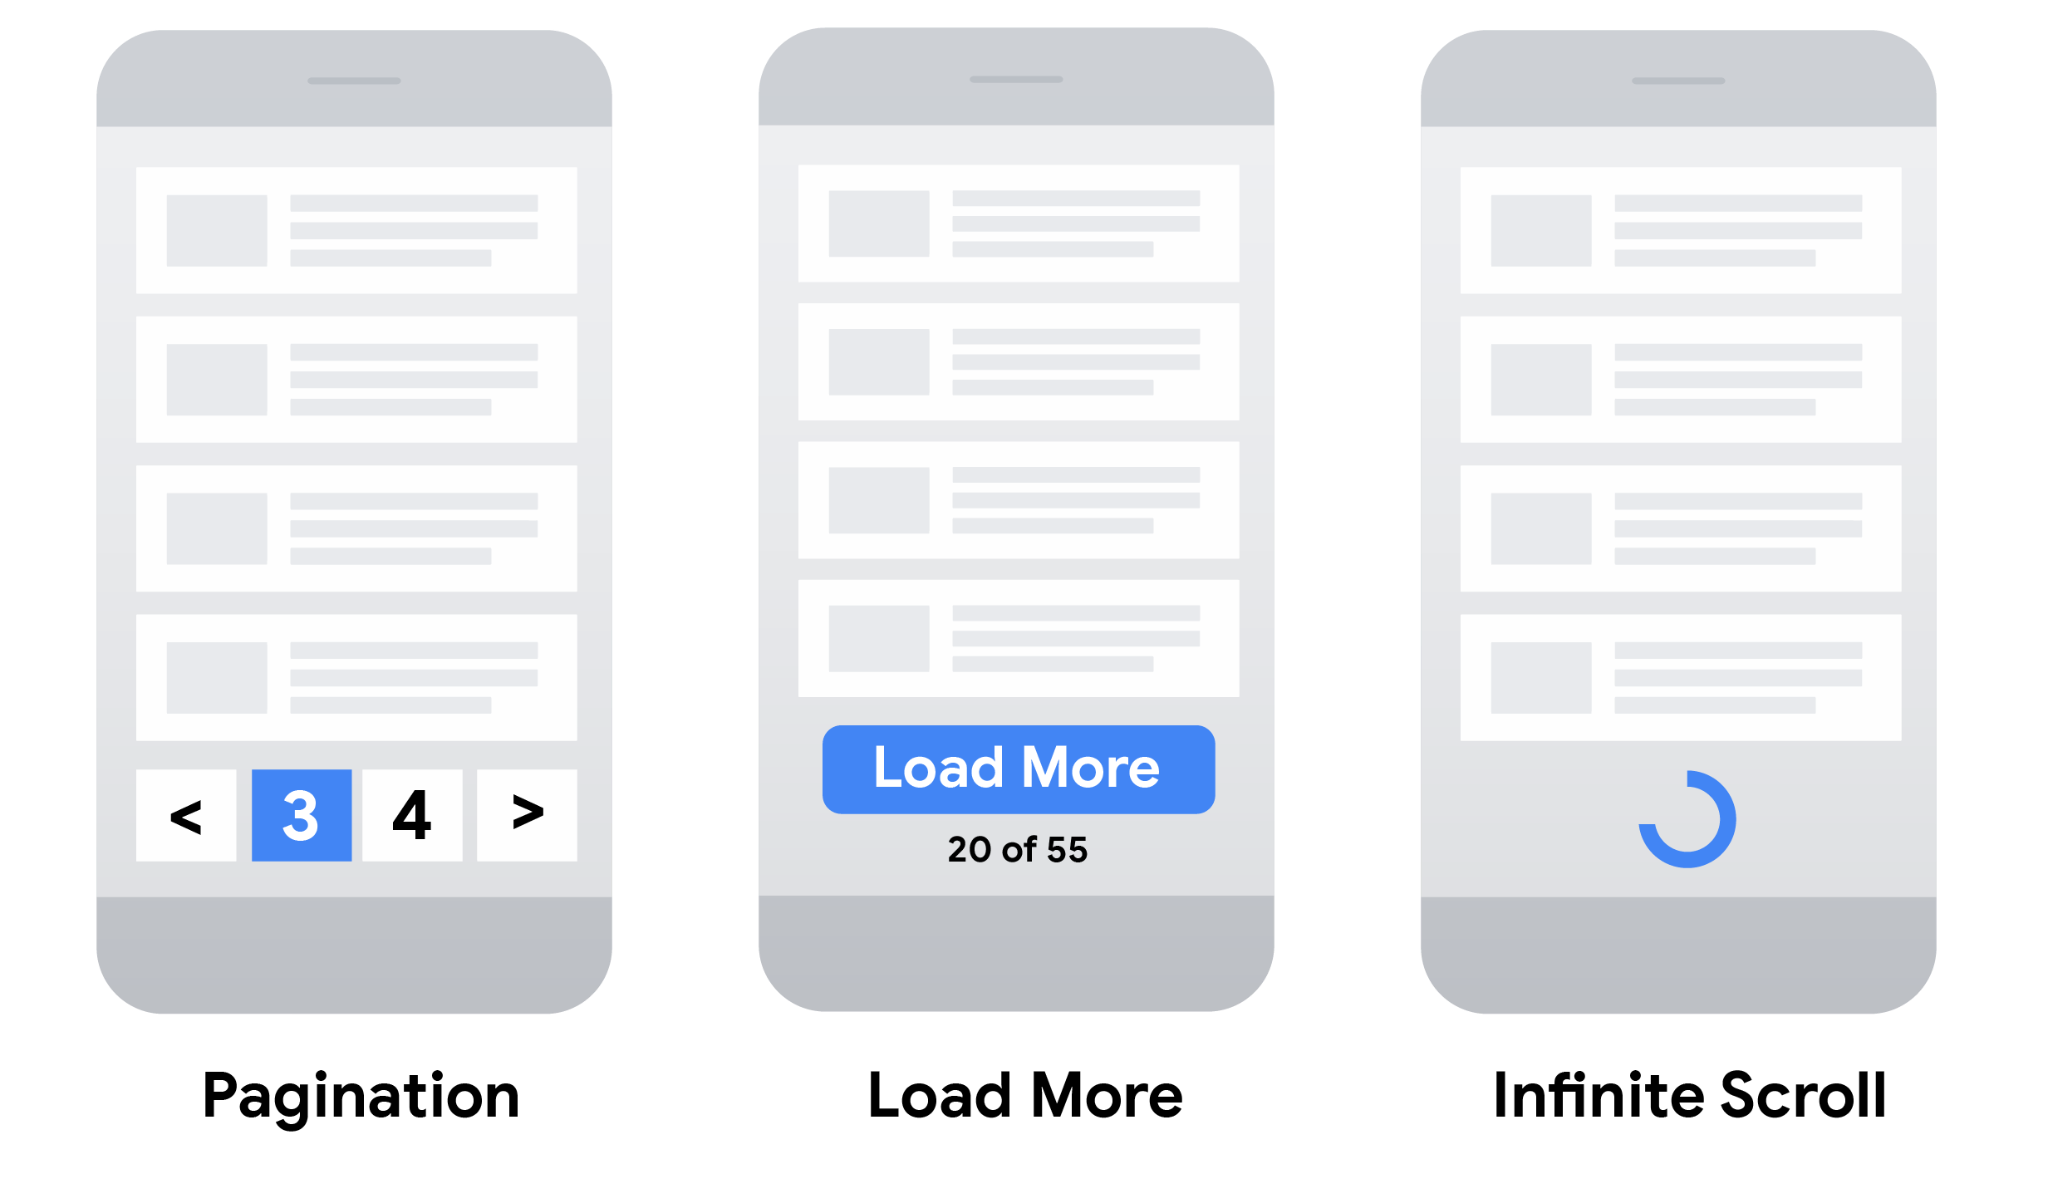 Typical pagination, load more, and infinite scroll patterns for mobile devices